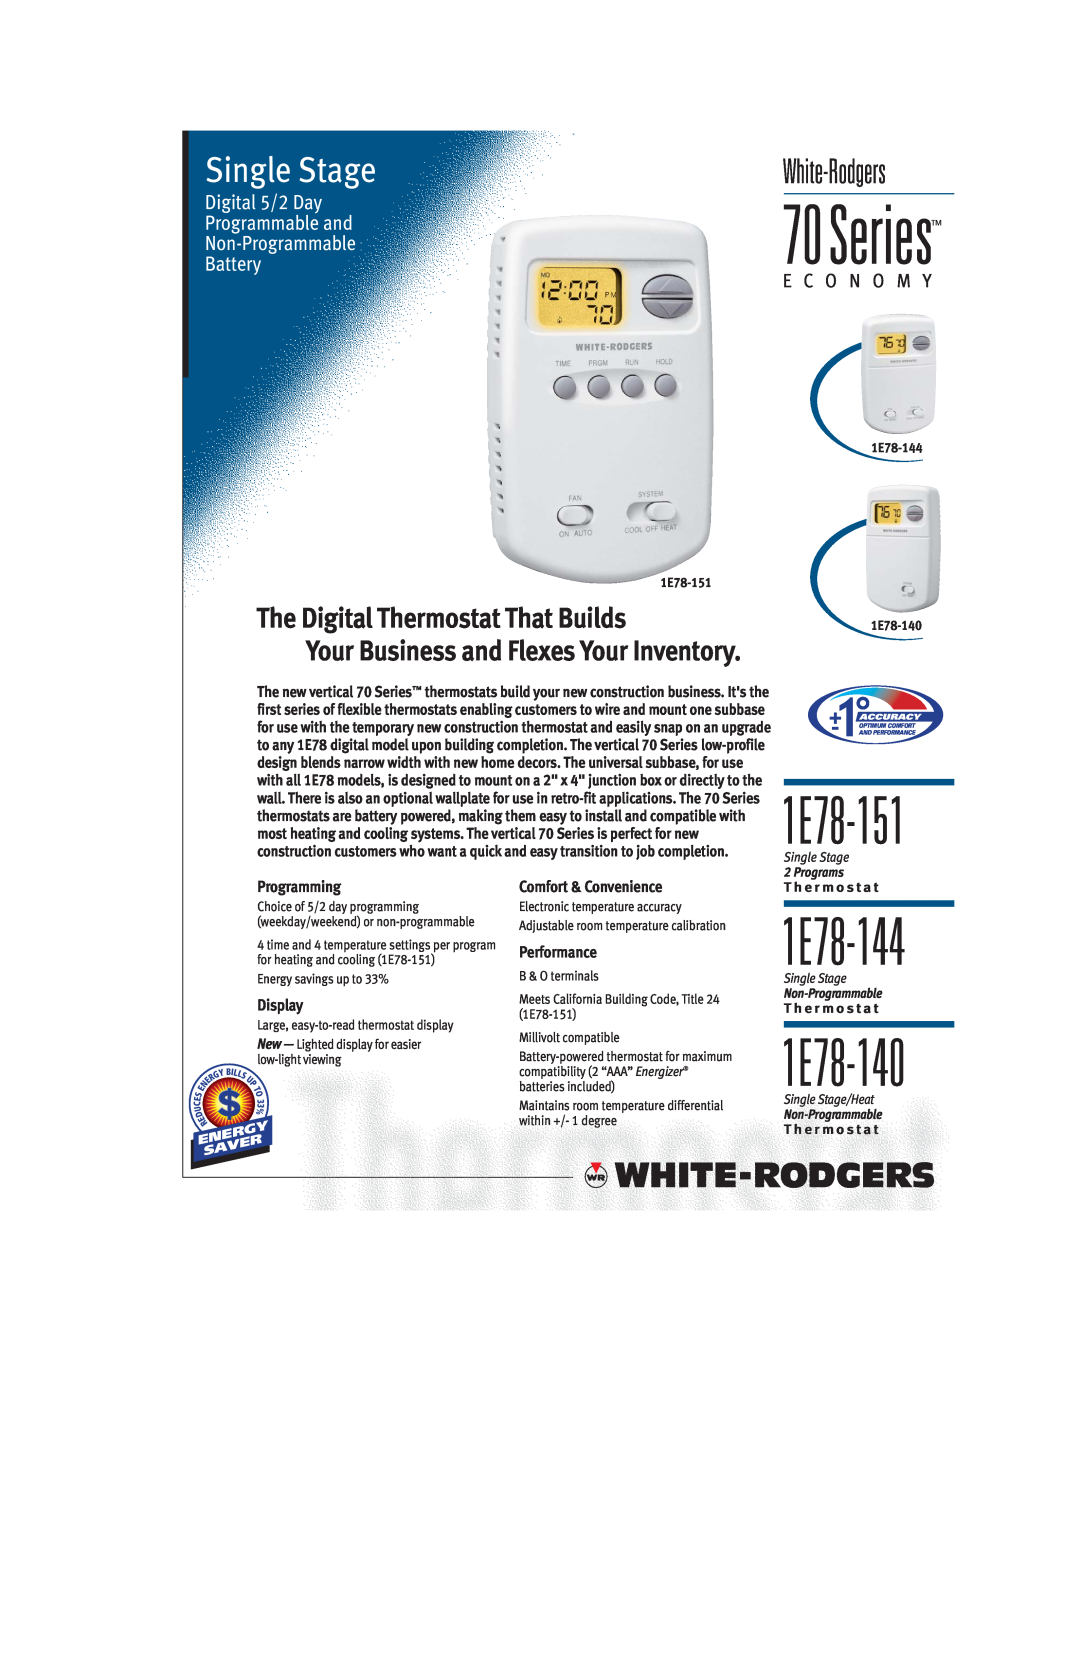 White Rodgers 1E78-144 dimensions Programming, Display, Comfort & Convenience, Performance, 1E78-151, Single Stage, Series 